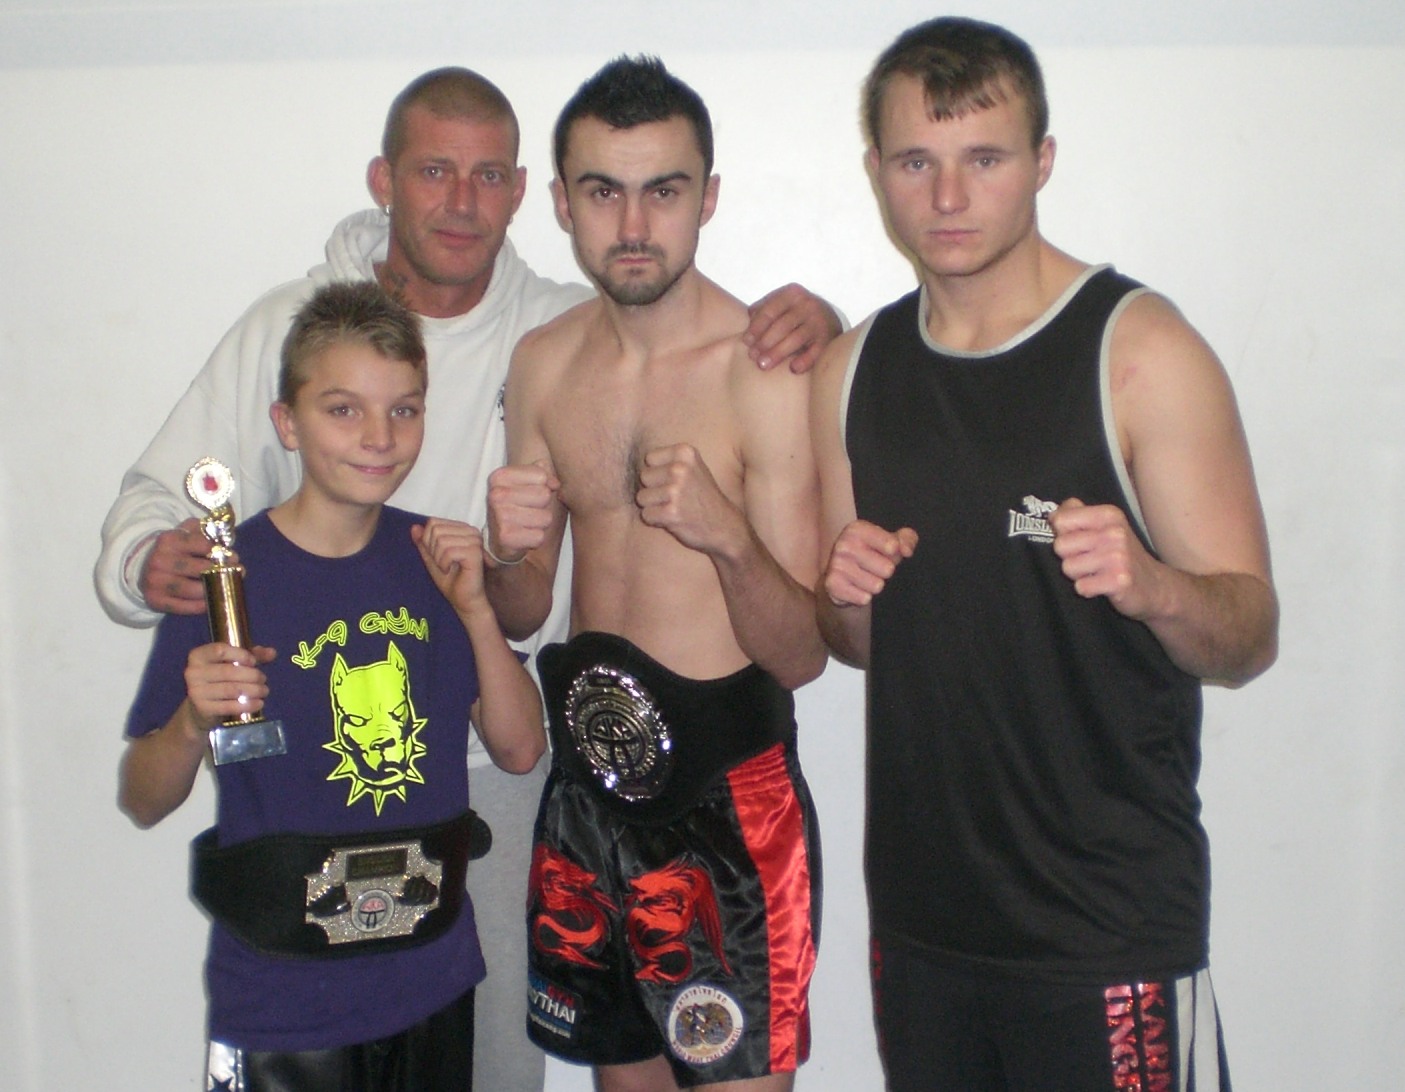 New Champions Danny Mitchell & Nicky Mchugh with Aaron Monson and coach Dave Munro